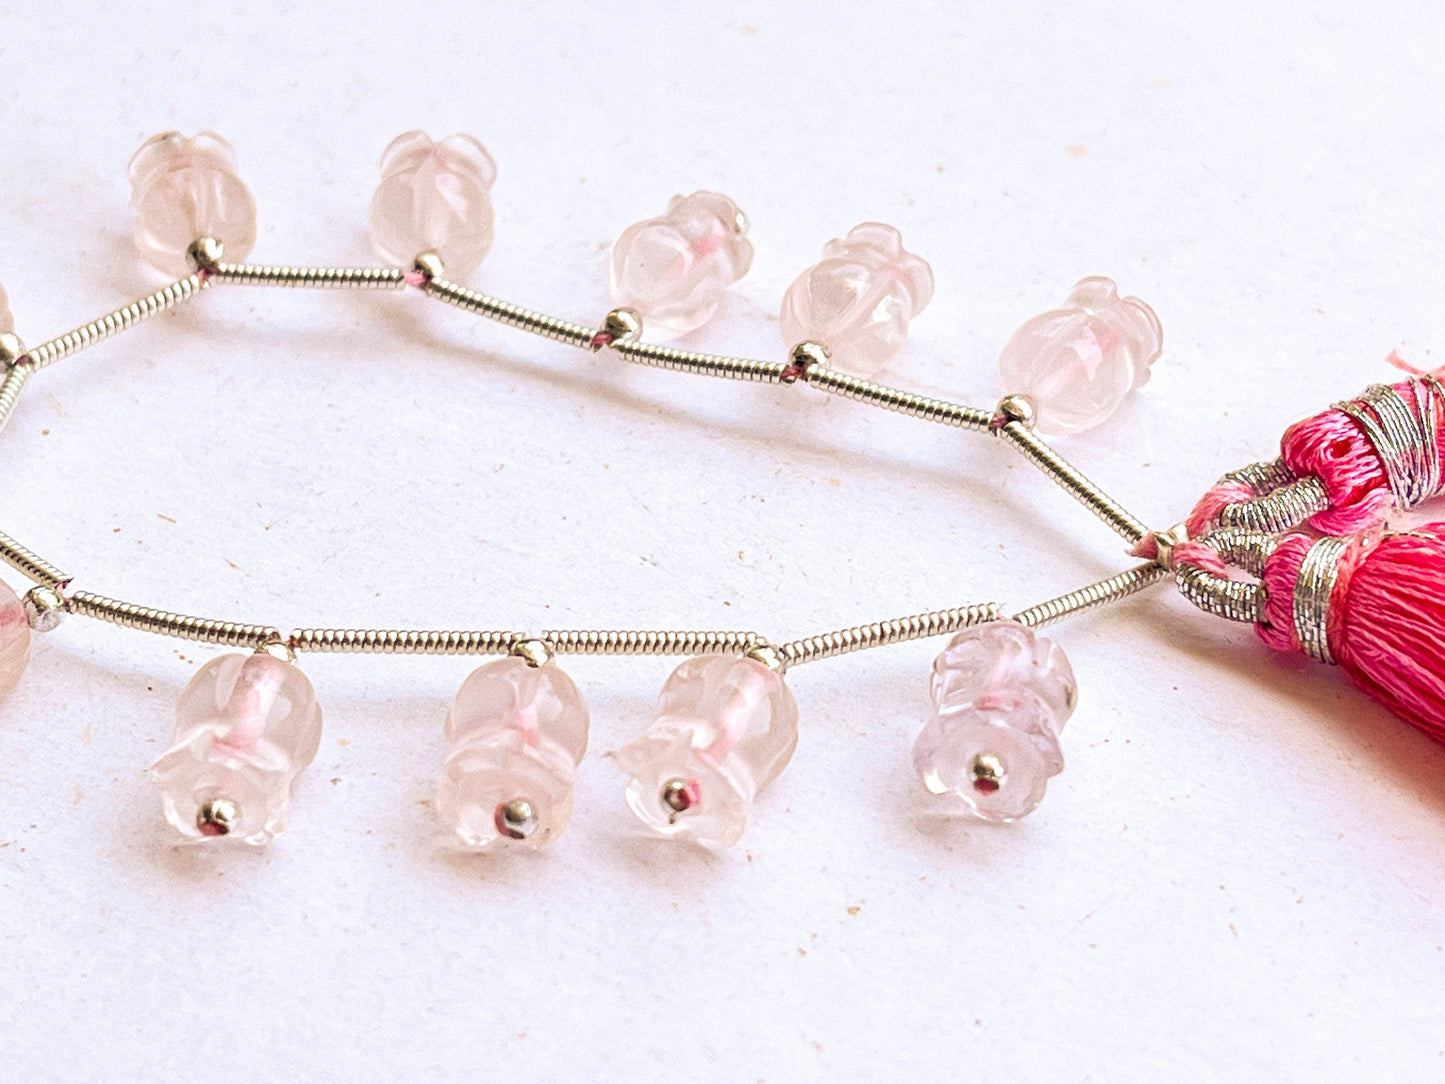 12 Pieces Rose Quartz flower carving Lily of the valley shape beads Beadsforyourjewelry